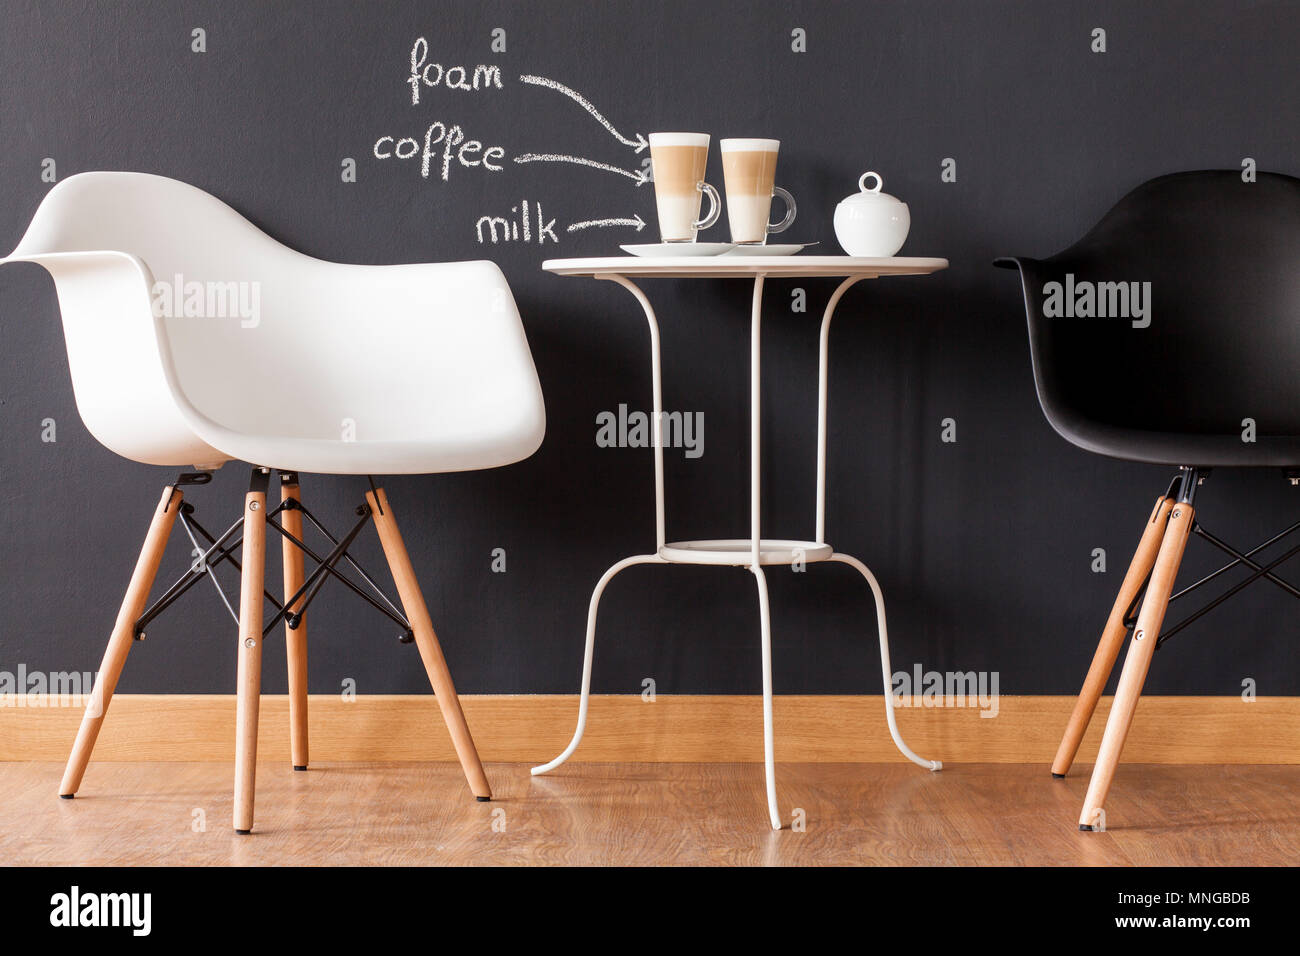 Shot Of A Coffee Table And Two Chairs In A Room Stock Photo Alamy